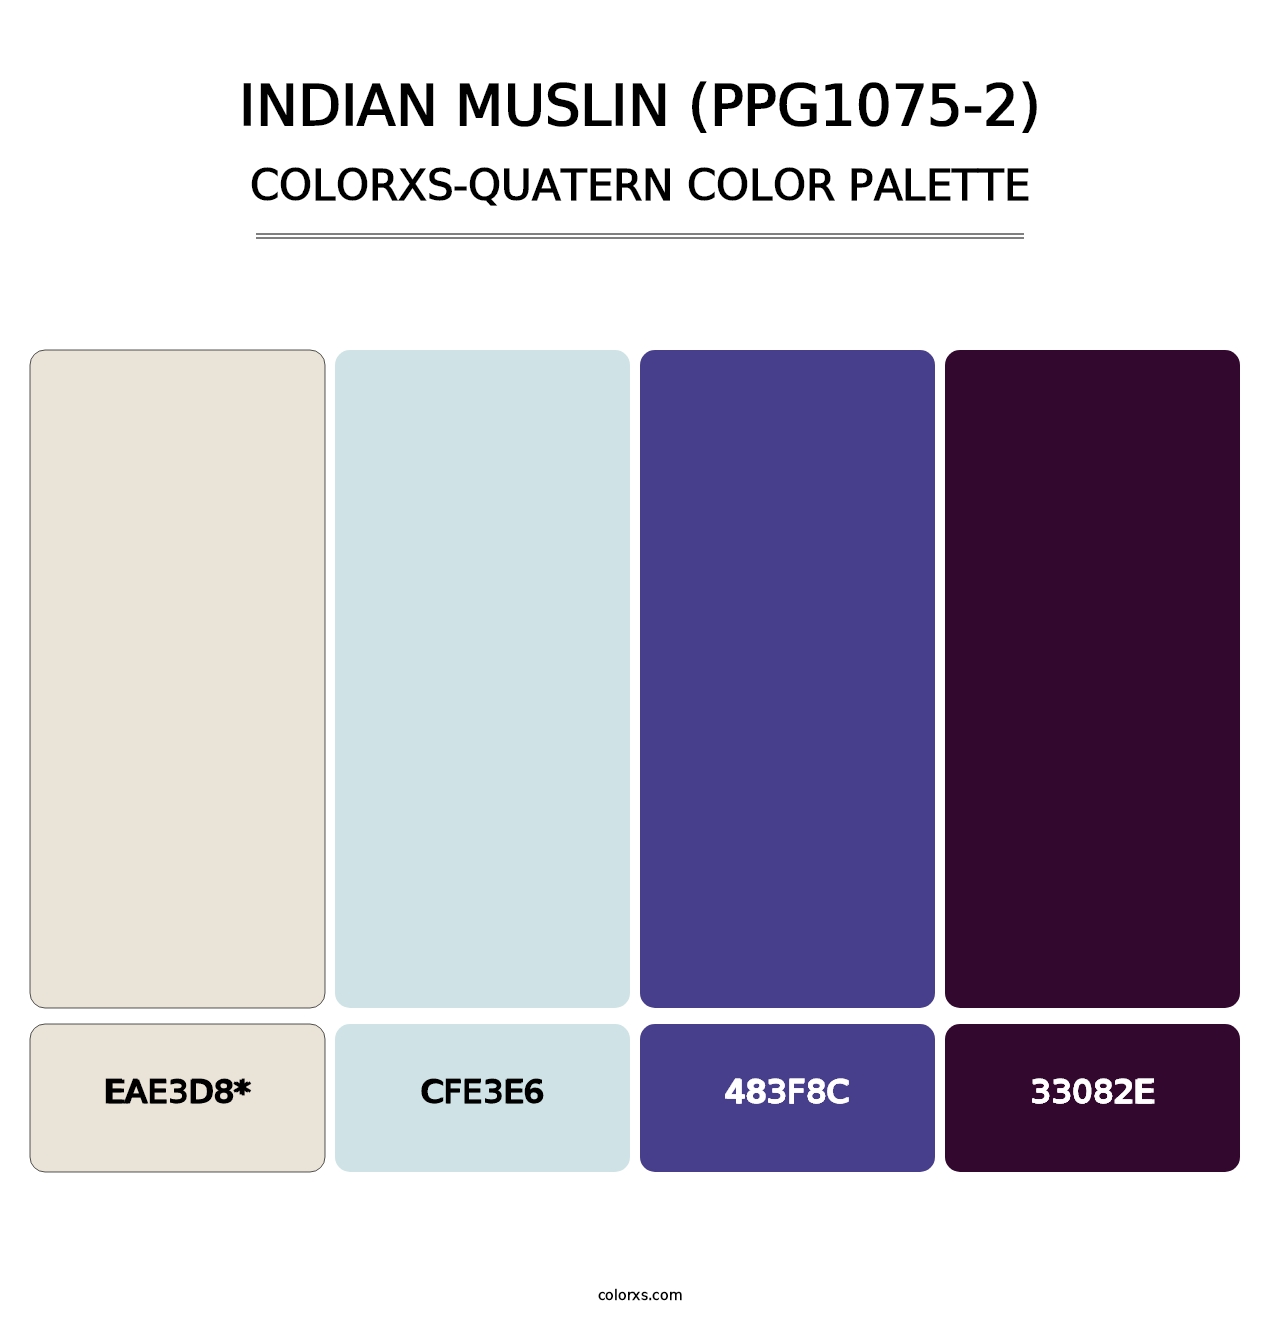 Indian Muslin (PPG1075-2) - Colorxs Quatern Palette